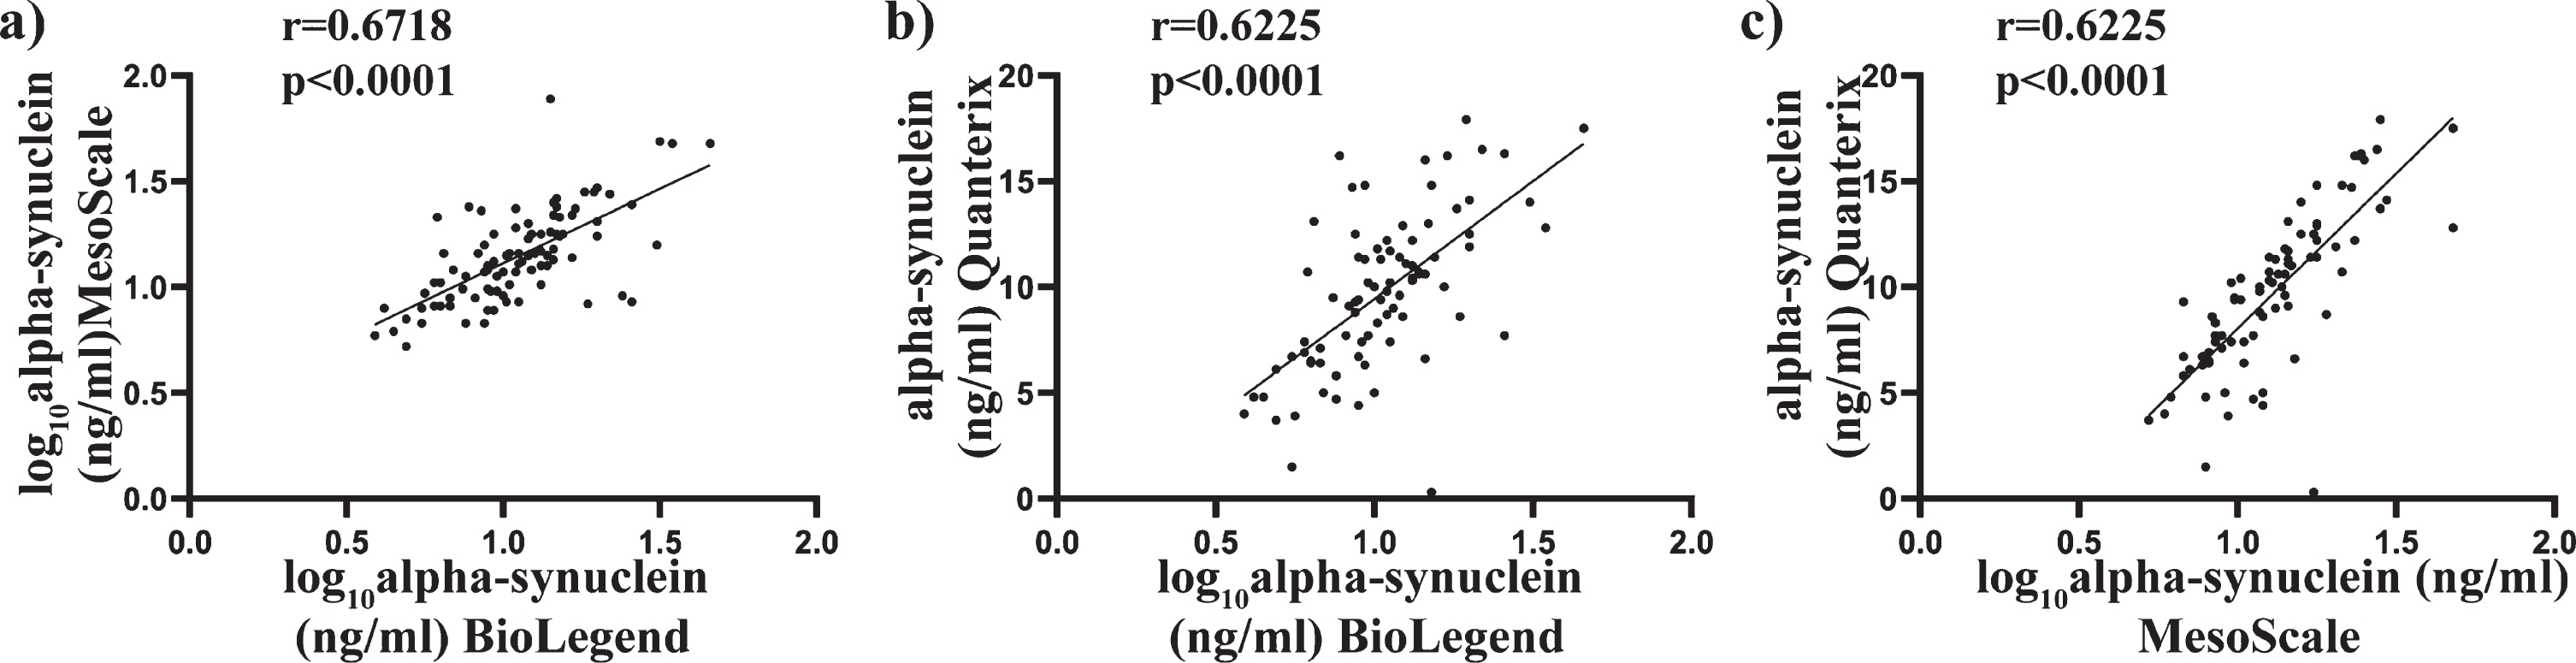 Comparison of total alpha-synuclein levels in plasma samples as determine using BioLegend, MSD and Quanterix assay. Scatter plots showing correlations between total alpha-synuclein (pg/mL) measured in the same patient plasma samples. Where required, data were transformed to achieve normality. Pearson analysis was used to assess significance at the 0.05 level. A significant correlation was observed between the BioLegend and MesoScale assay (a), BioLegend and Quanterix assay (b) and MesoScale and Quanterix assay (c).